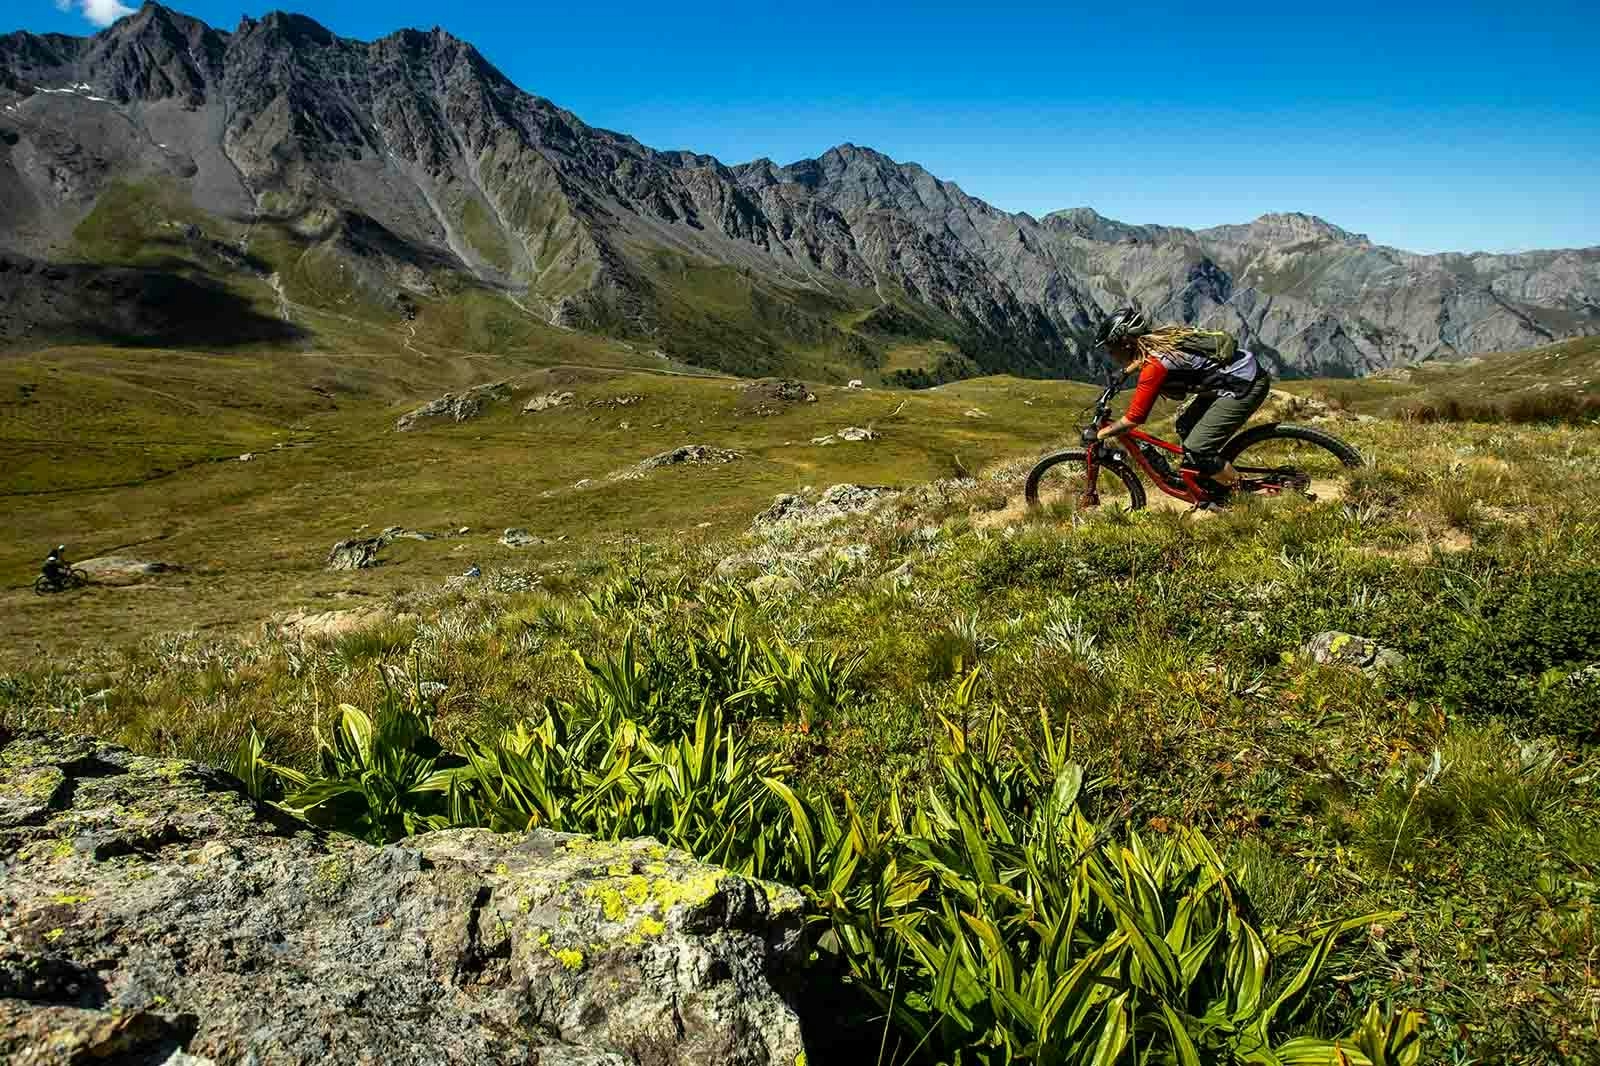 Anka Martin riding her mountain bike through a field with mountains in the background